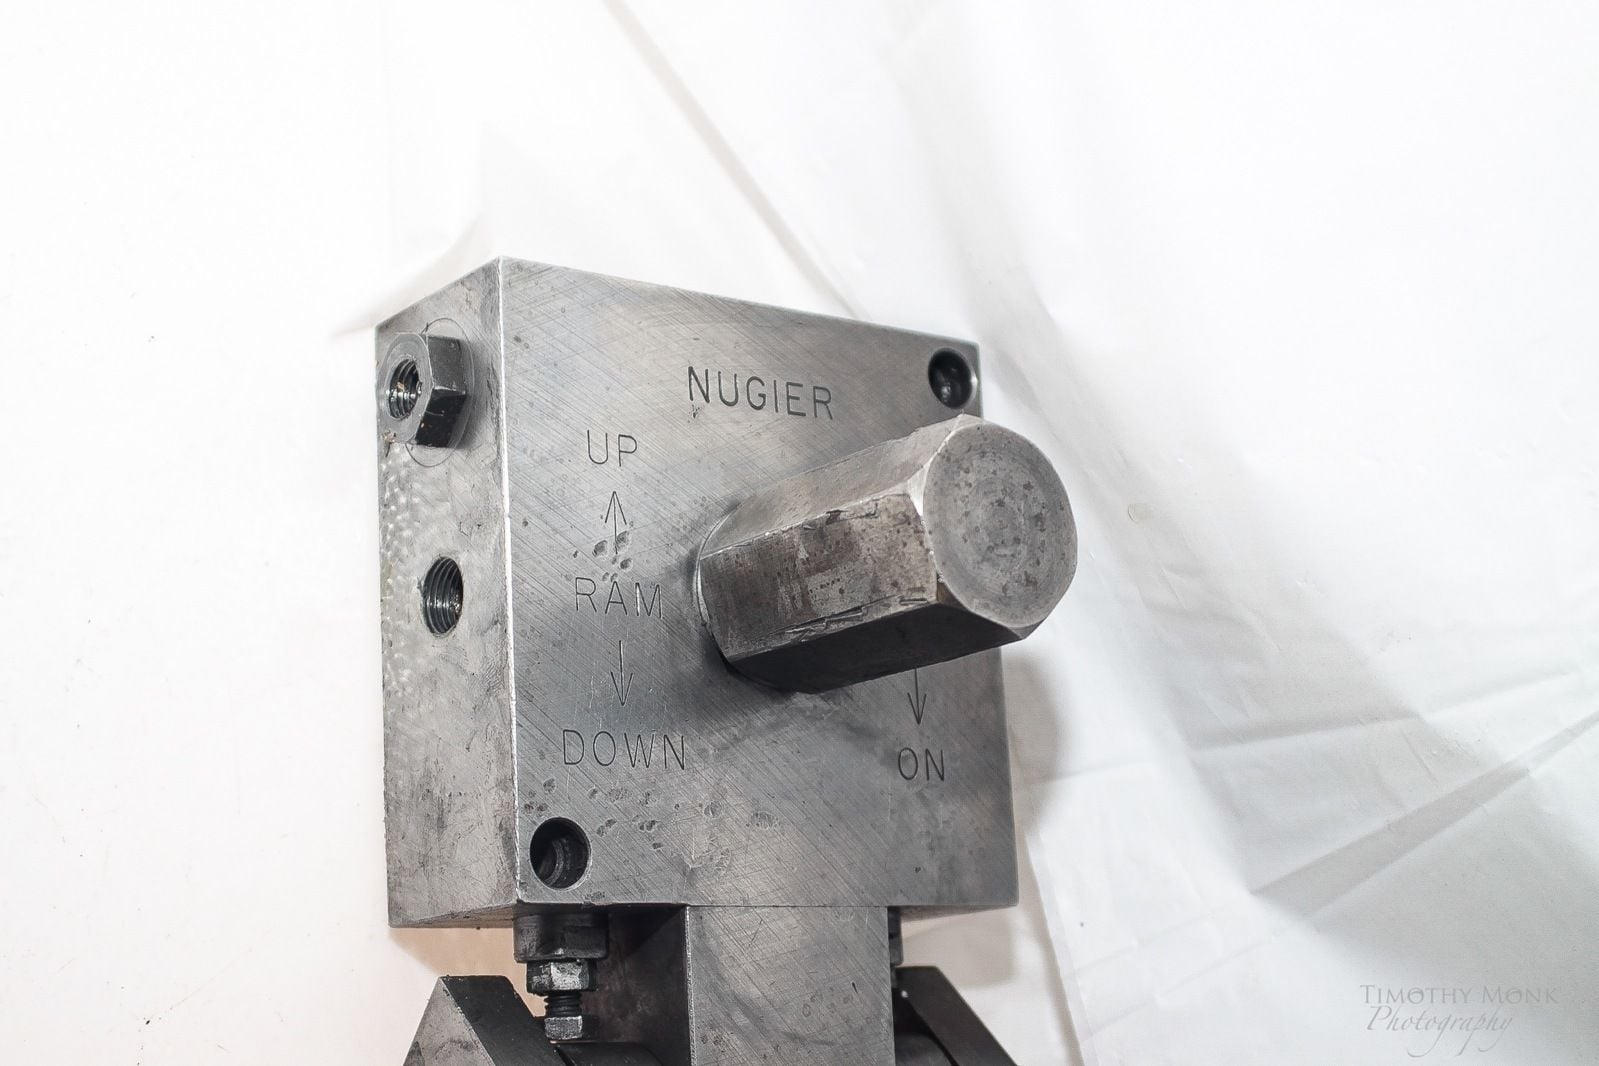 nugier contact number press